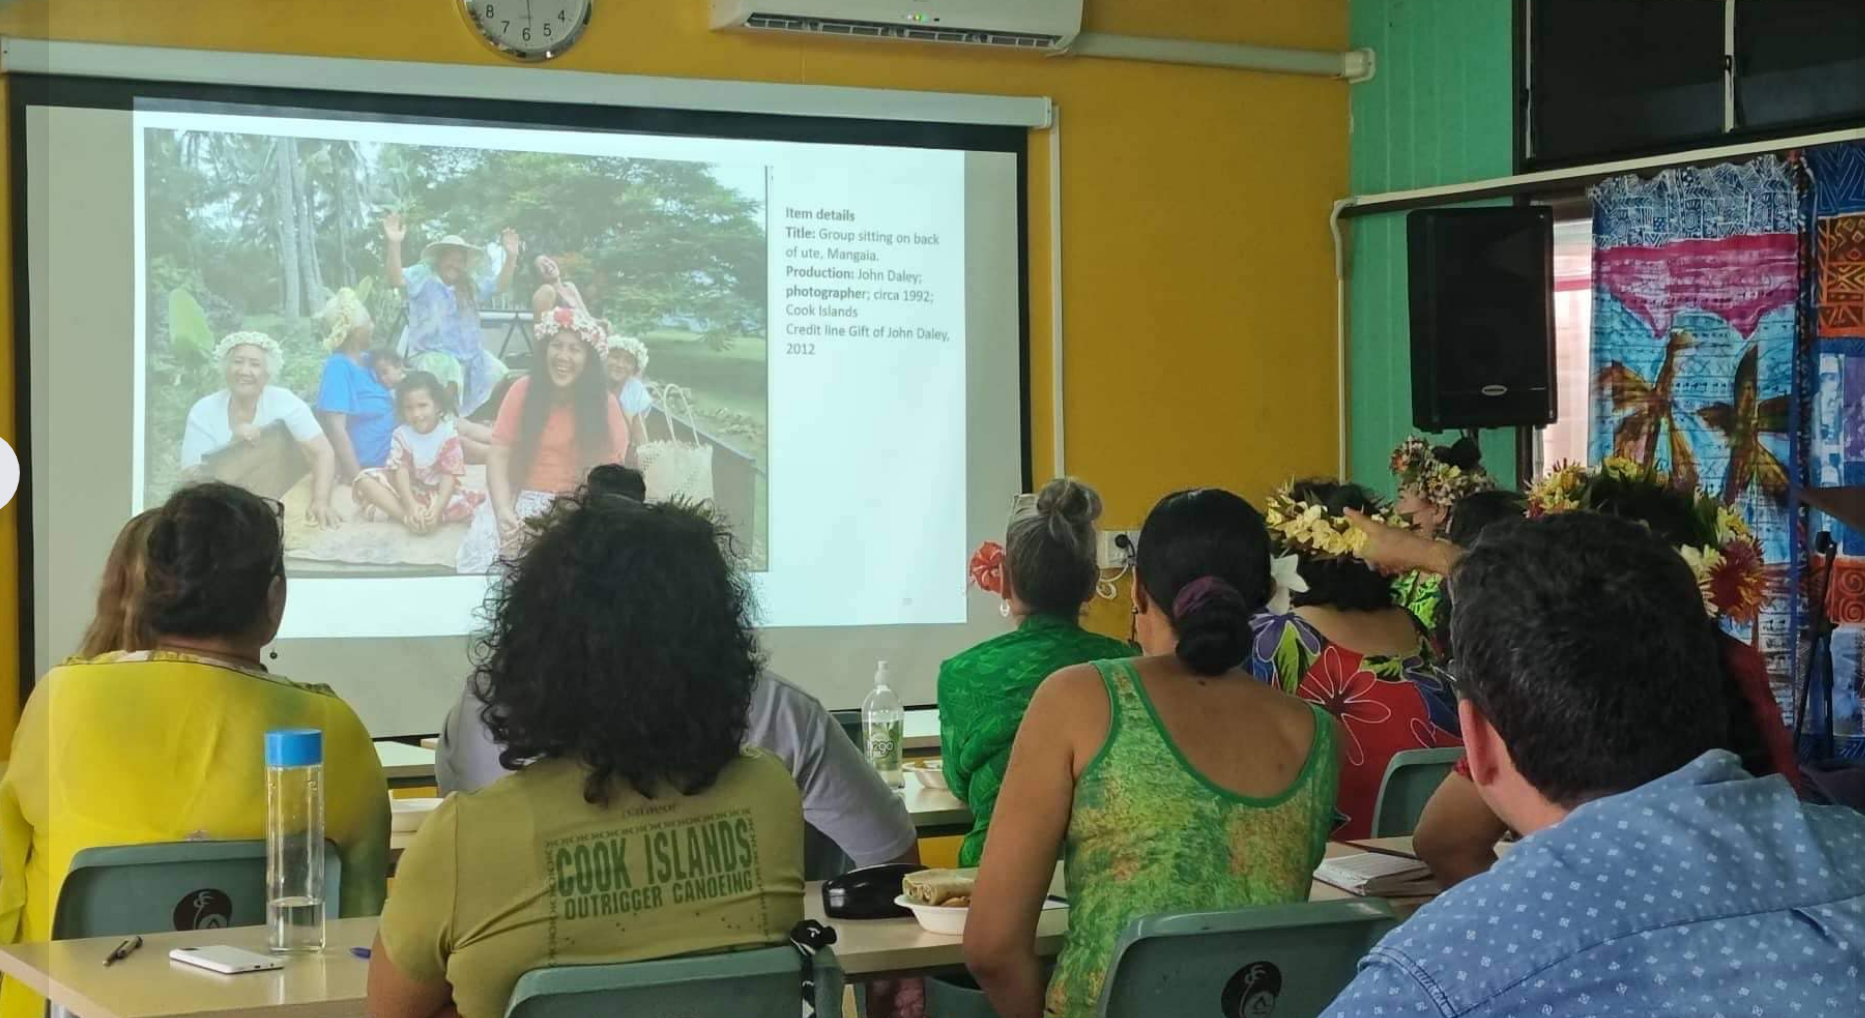 People look at photograph projected on a screen in workshop in the Cook Islands